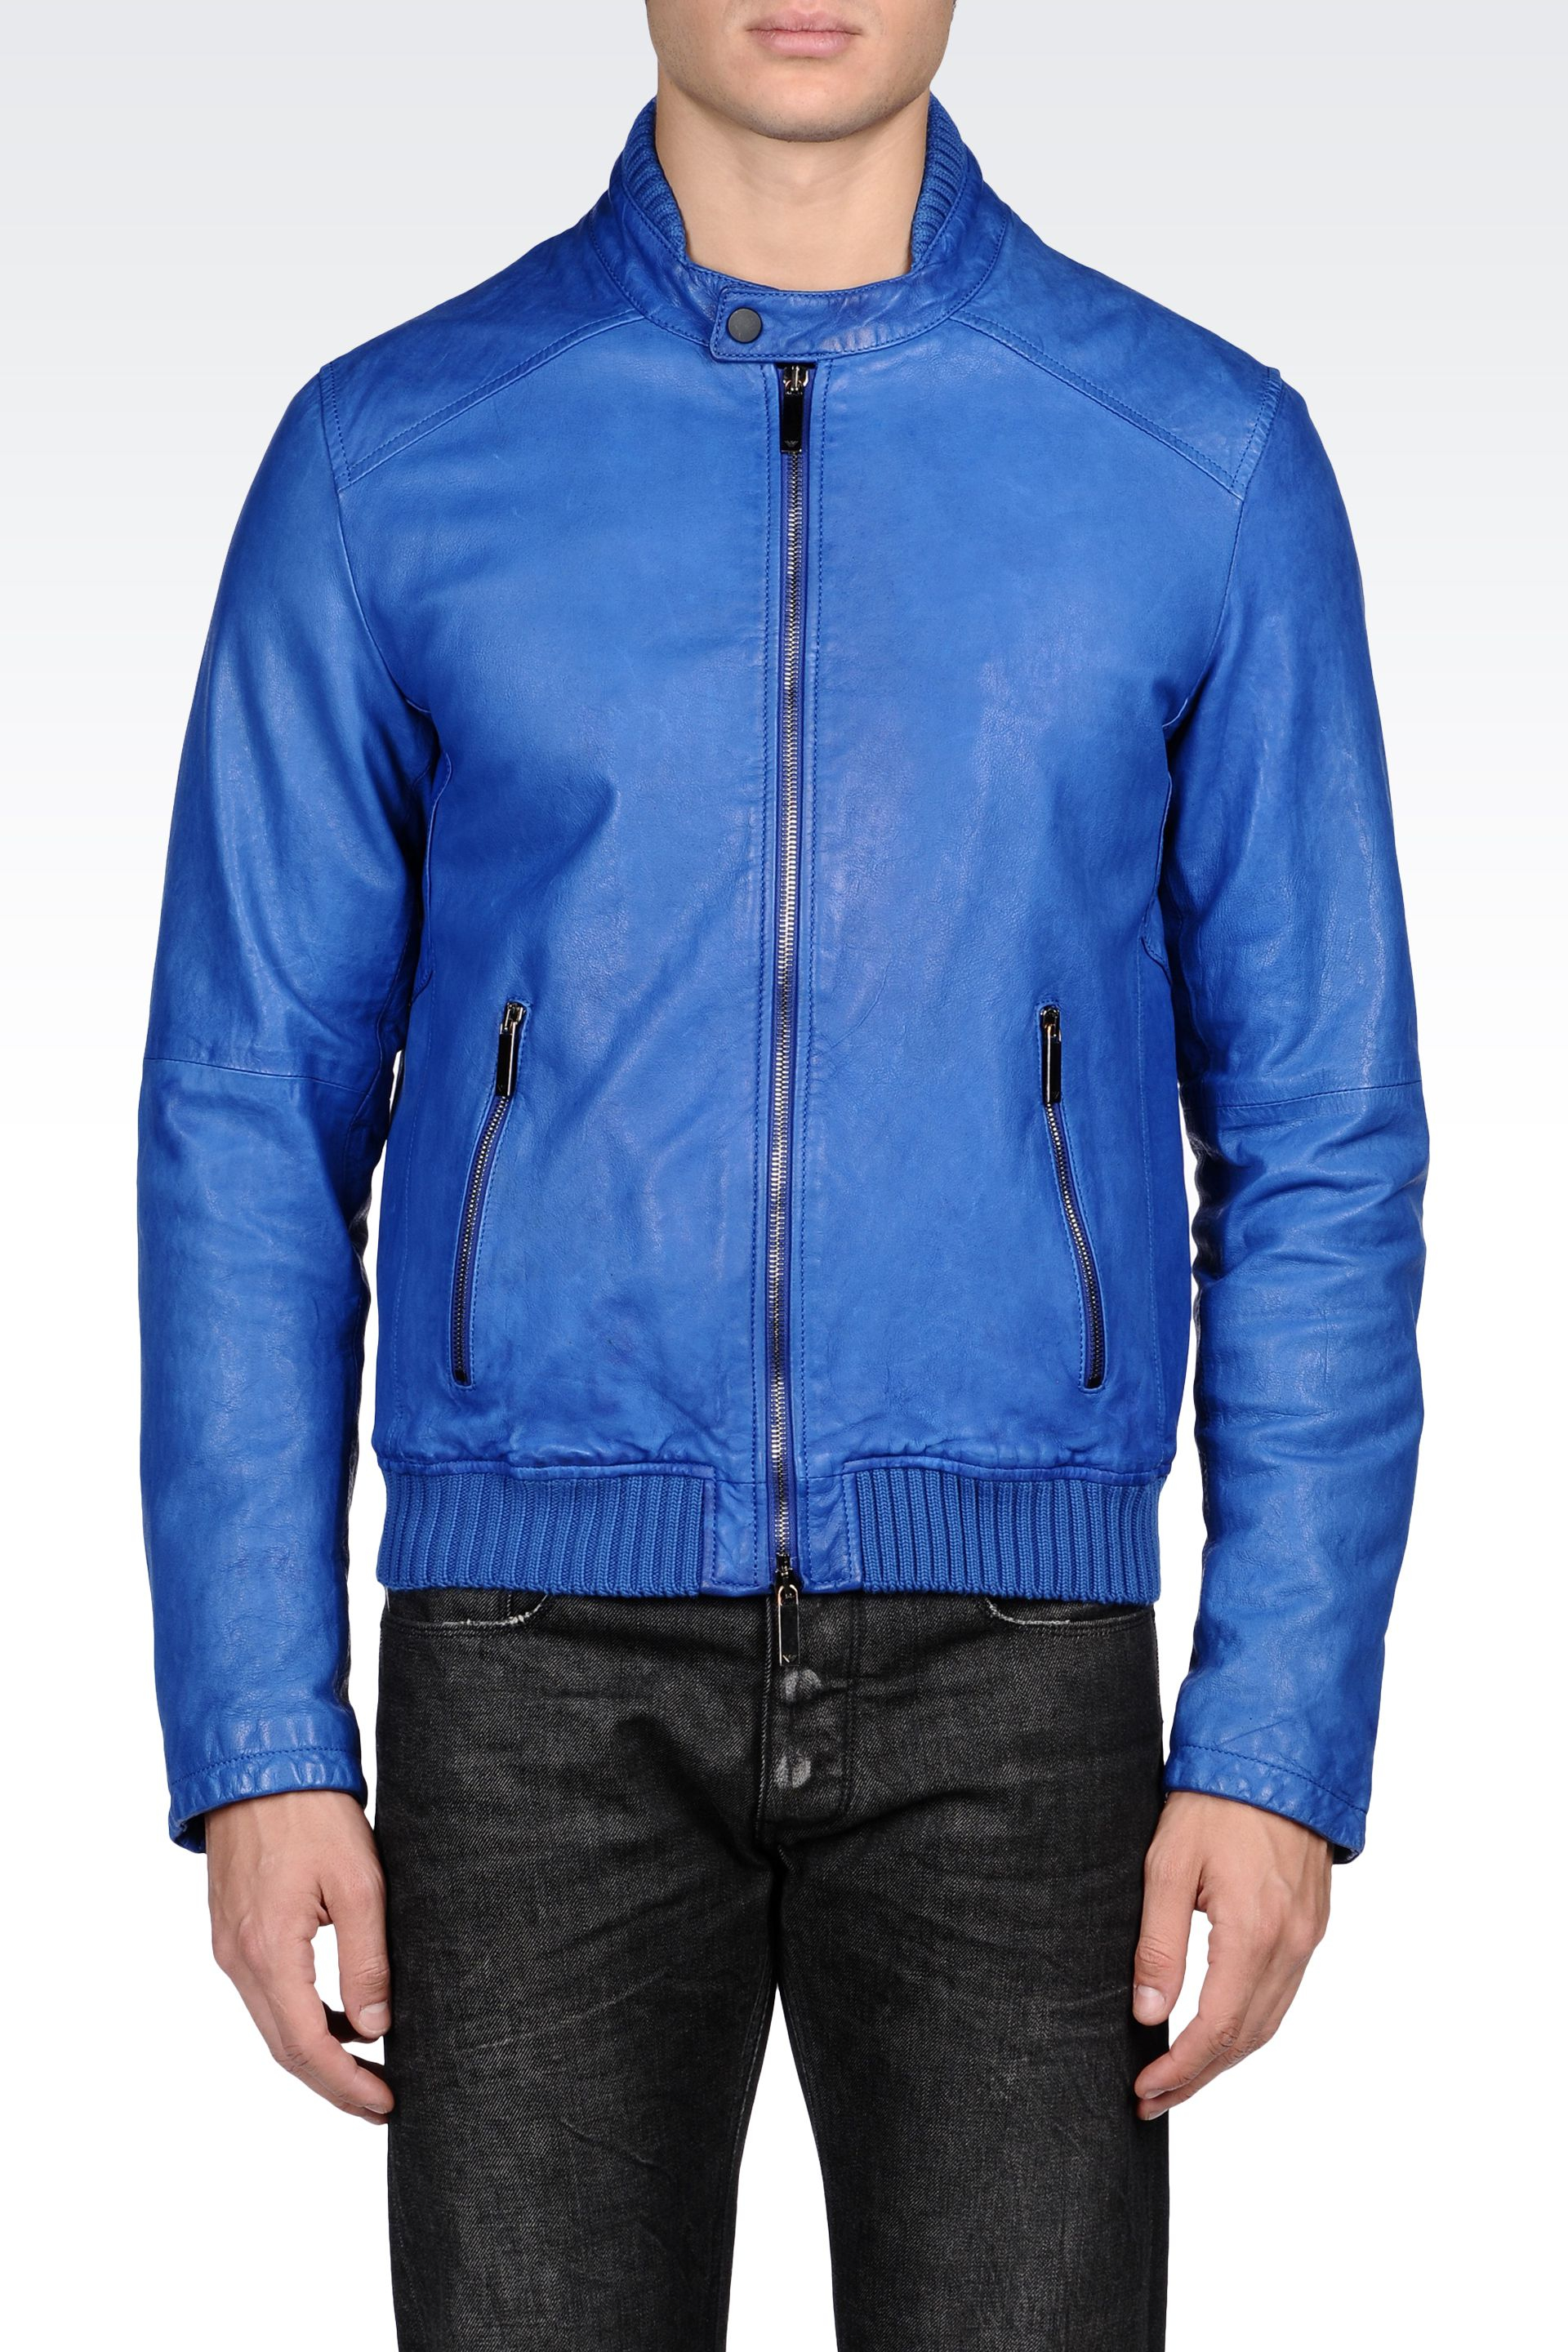 Emporio Armani Nappa Leather Biker Jacket with Knit Details in Bright ...